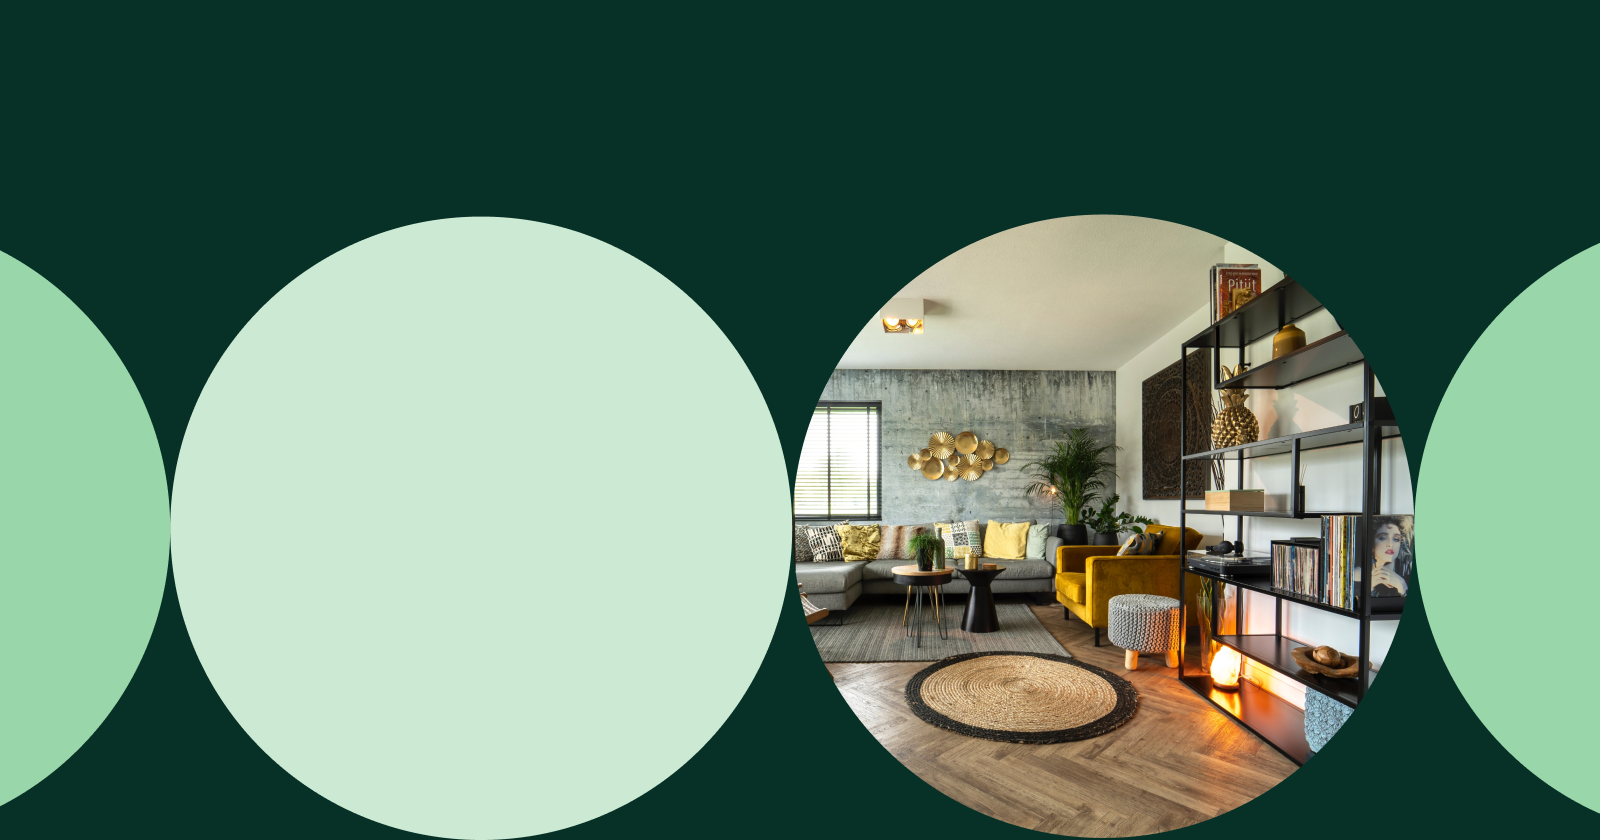 Three Light Green Full and Half Circles and One Photo of a Decorated Living Room in a Row Within a Dark Green Background